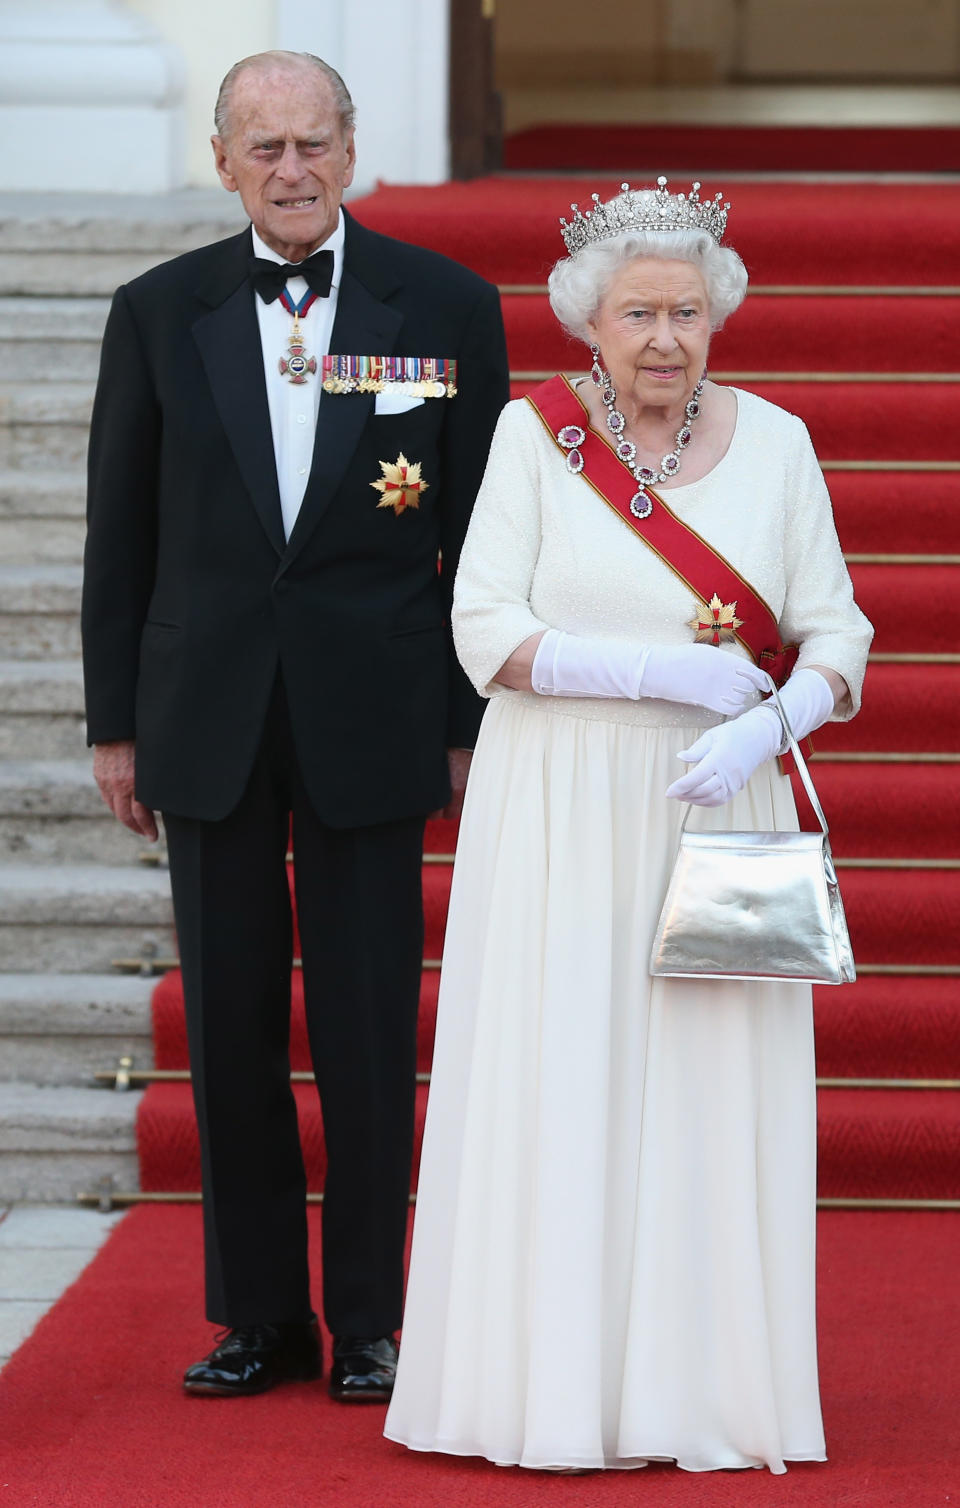 Prince Philip also keeps a respectful distance from the Queen. Photo: Getty Images